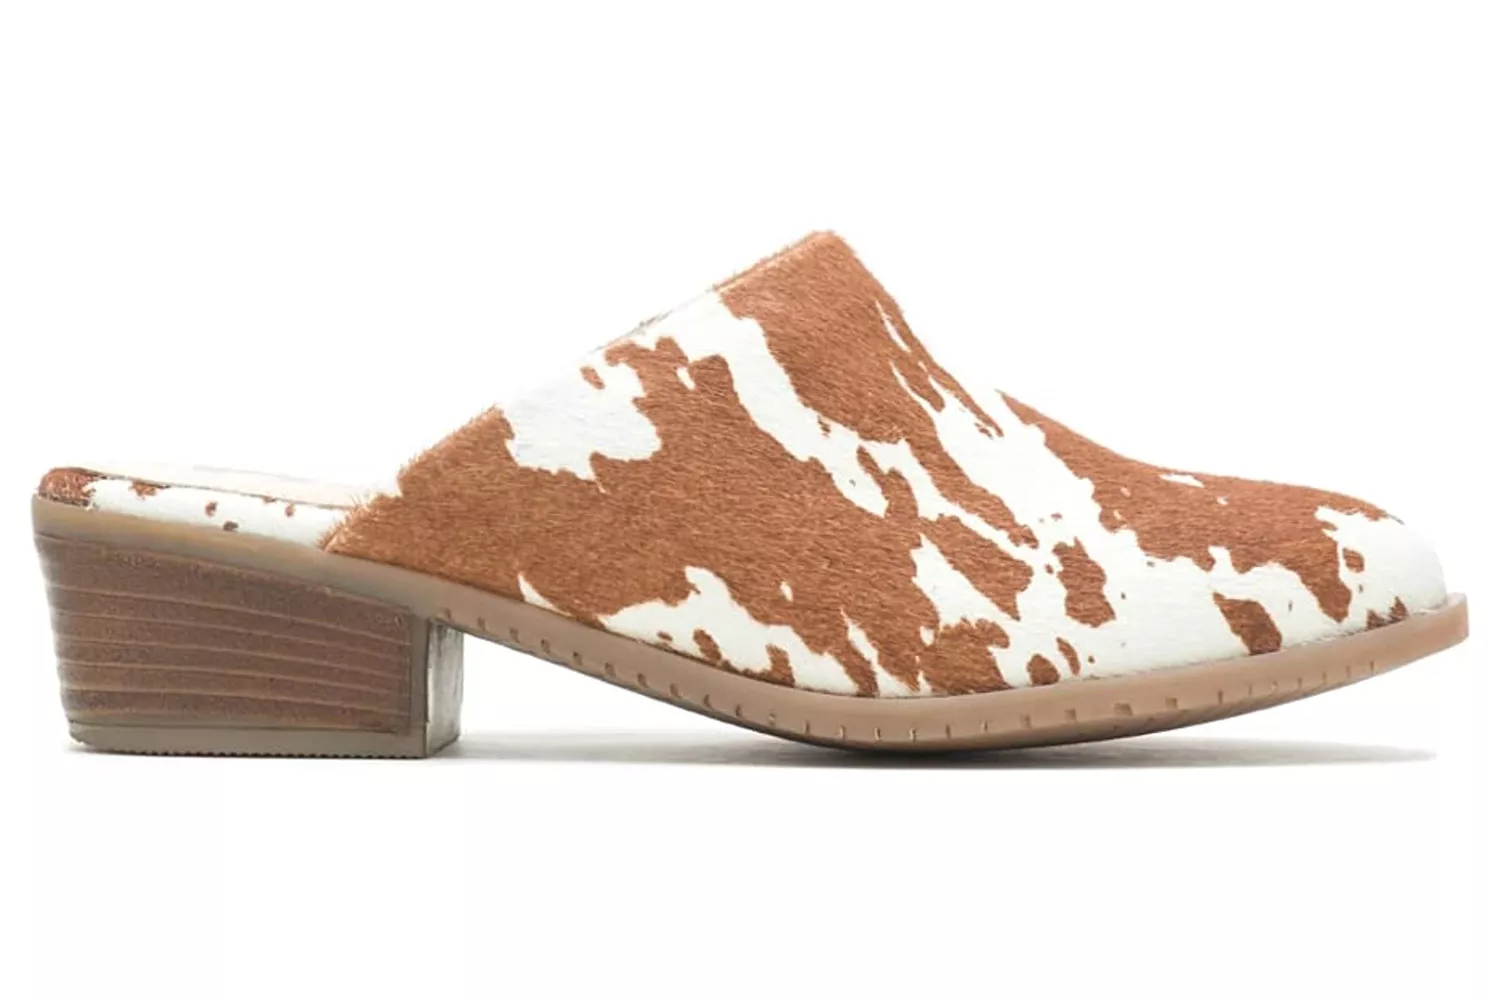 The Most Comfortable Mules: Hush Puppies Womens Sienna Mule